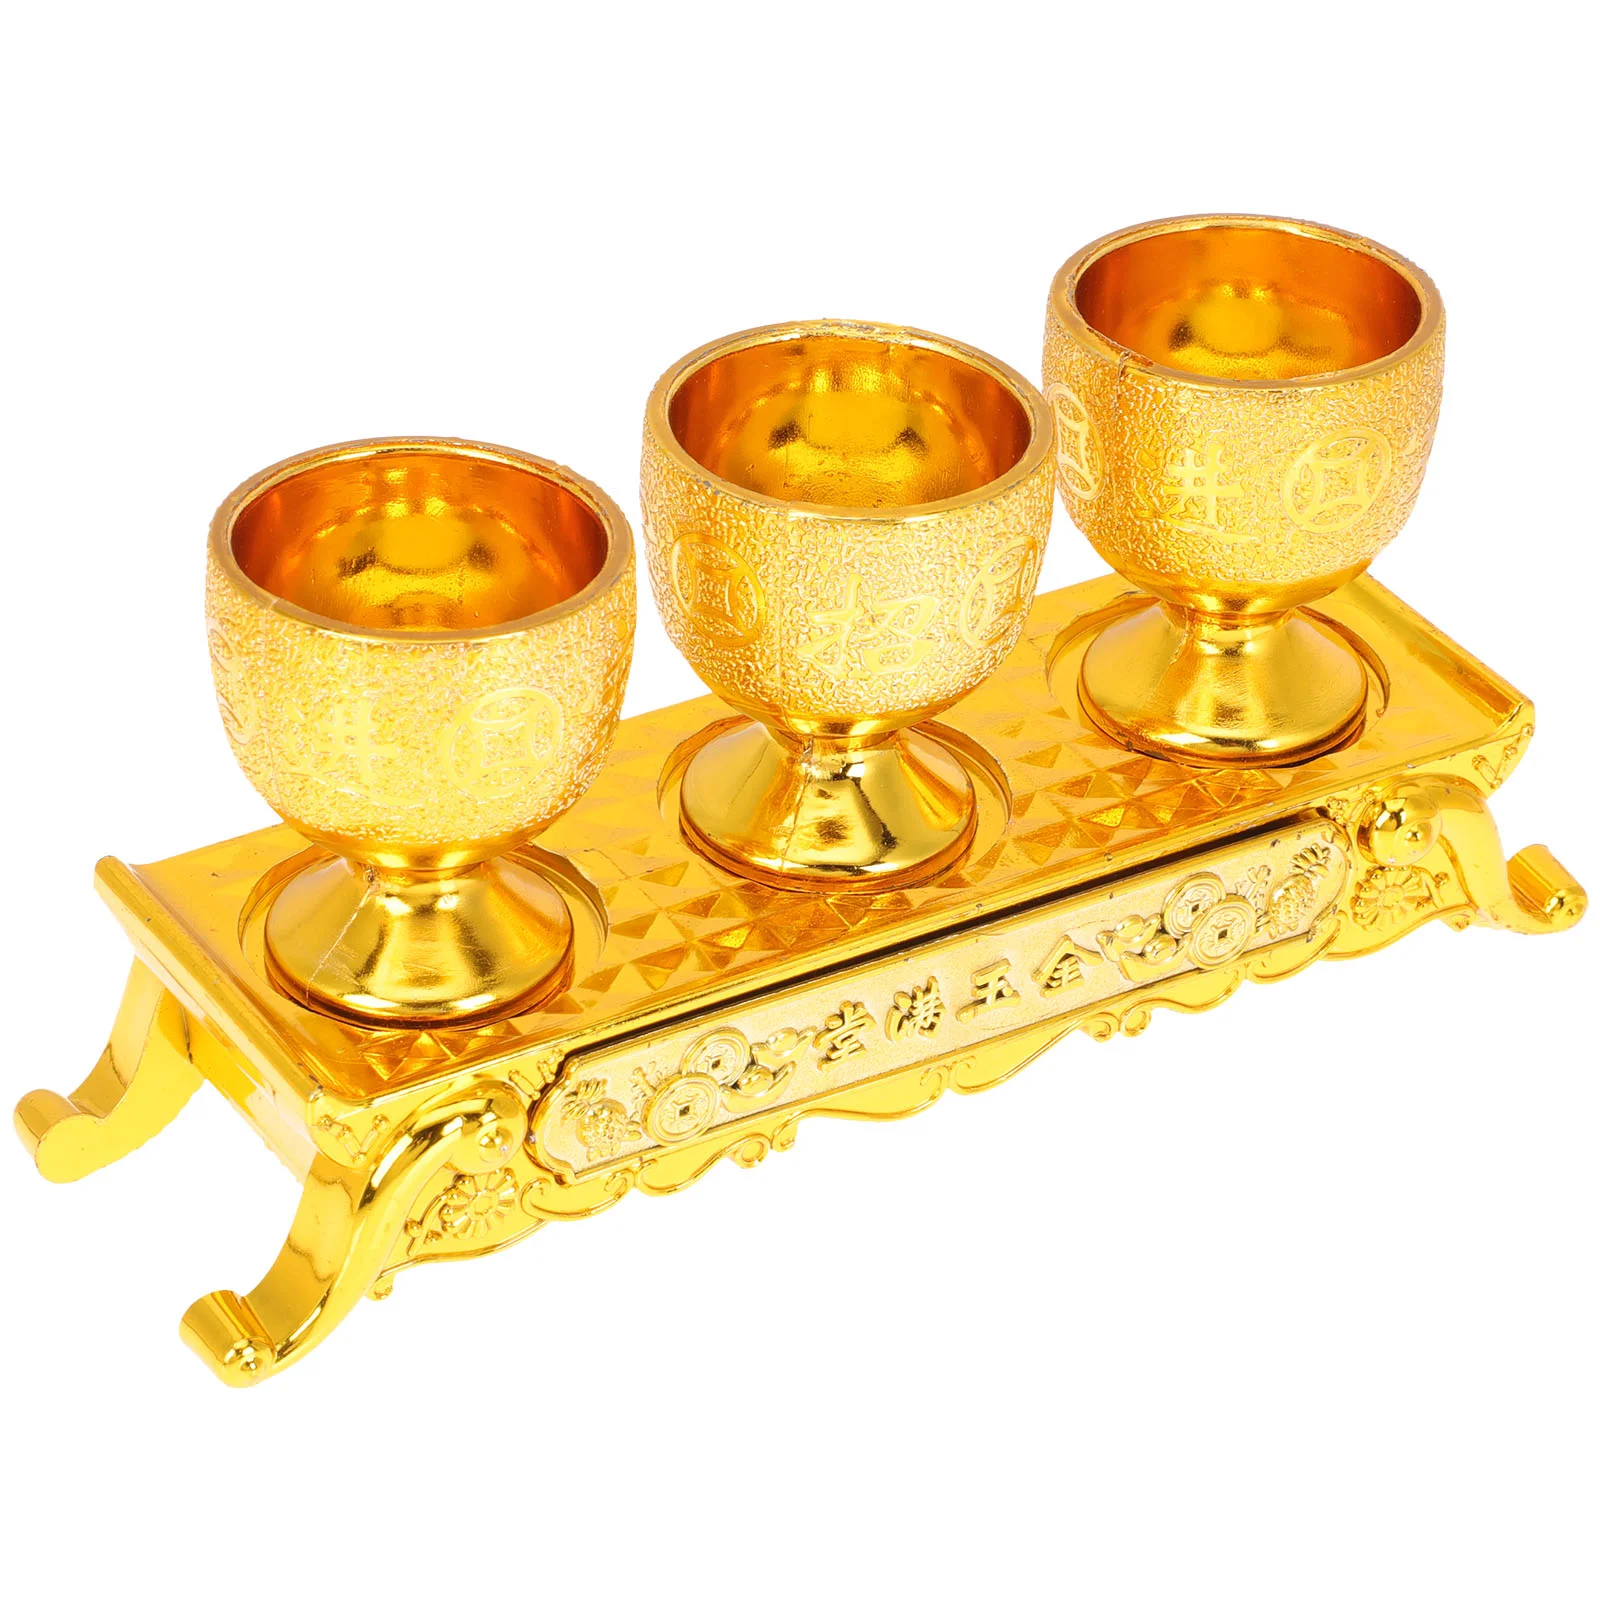 

Cup Offering Goblet Bowl Holychalicewater Vintage Glasses Temple Worshipshot Mini Smudging Energy Chineseritual Metal Brass